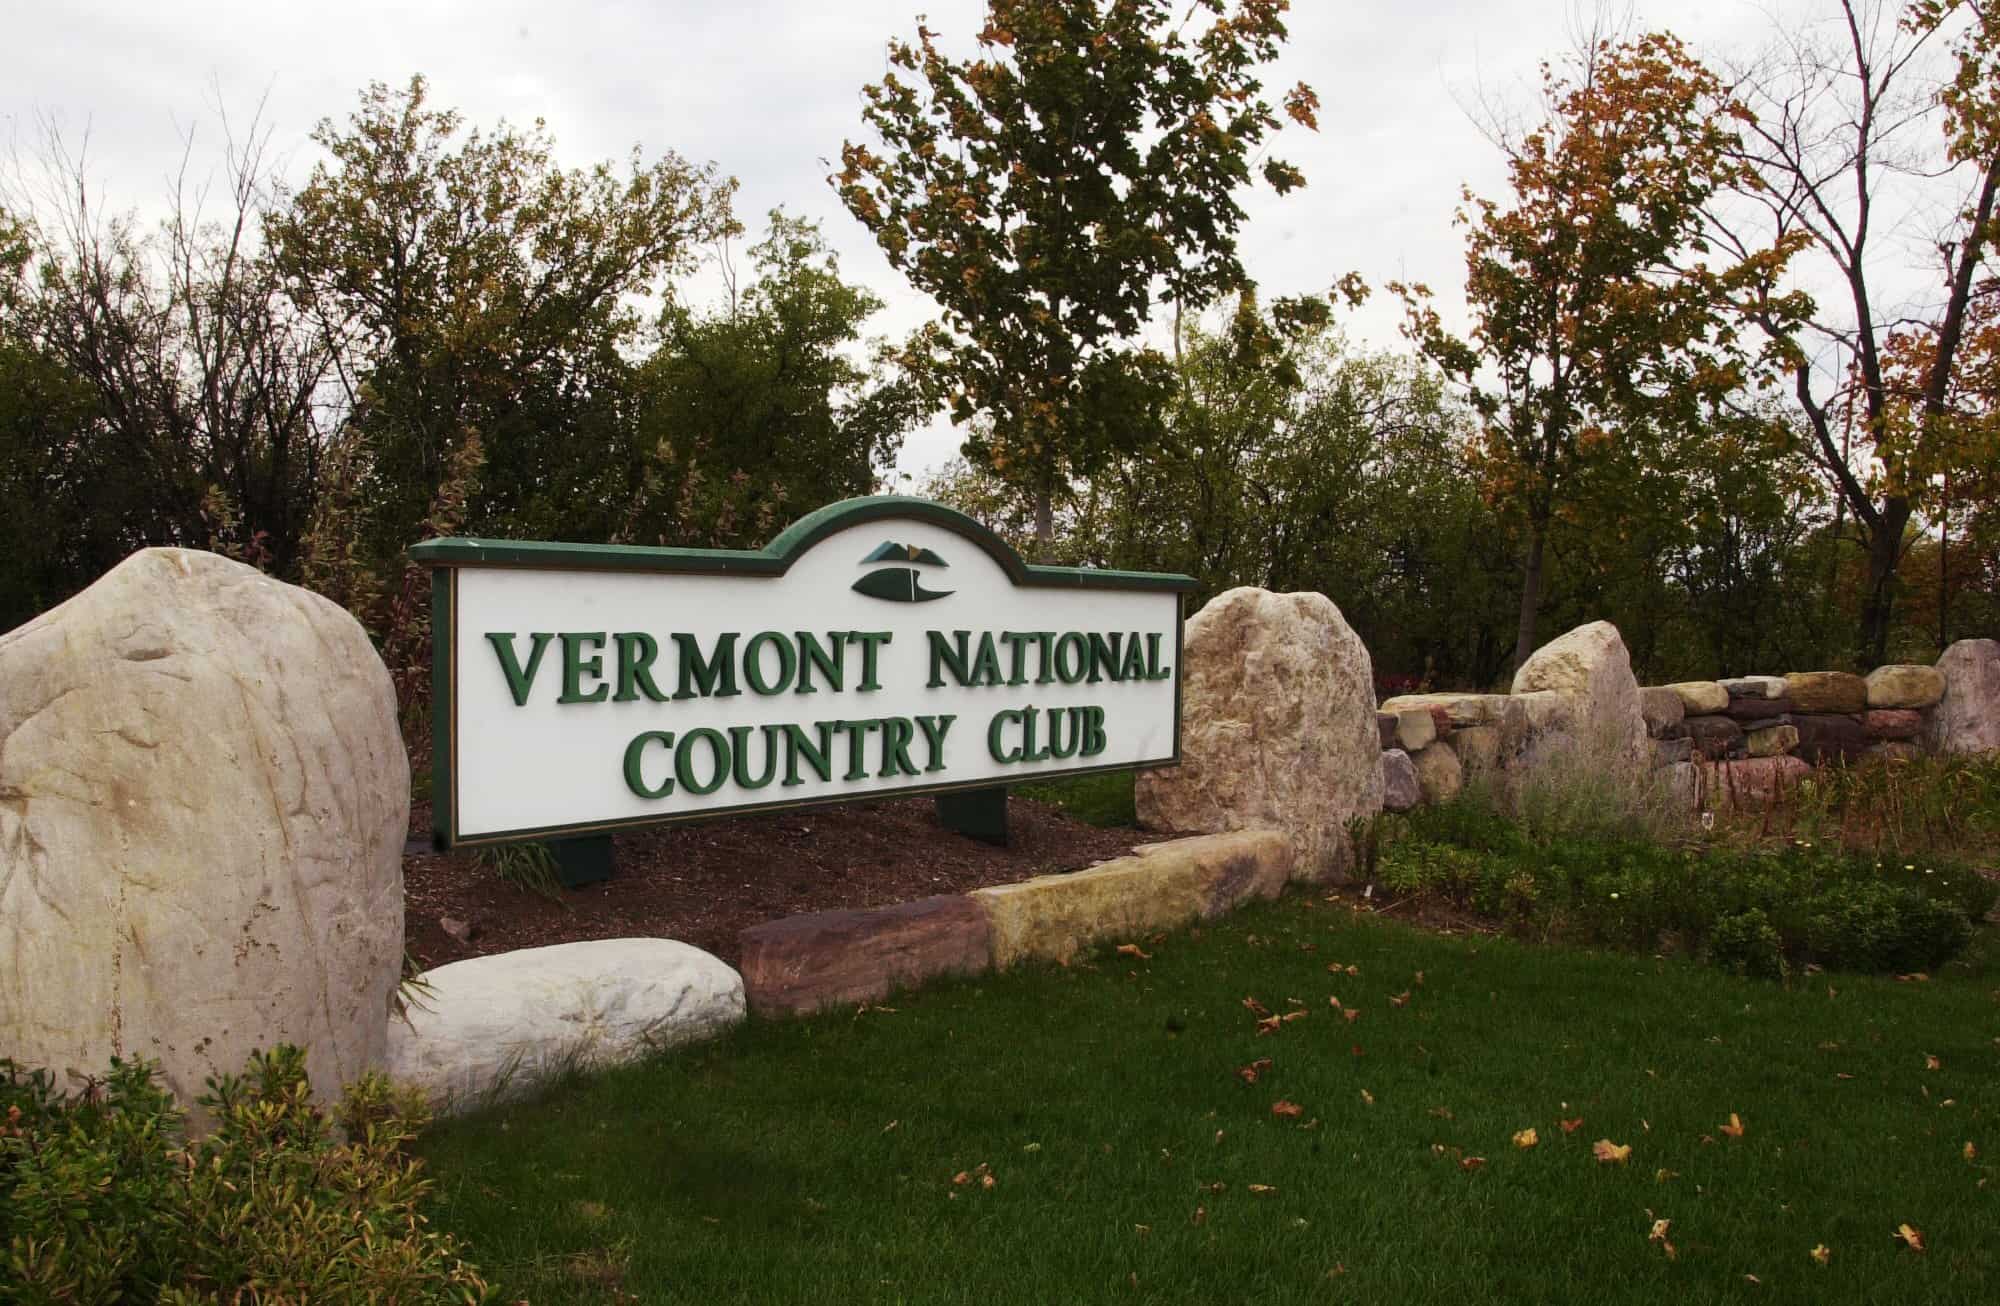 Vermont National Country Club - Sign at Entrance